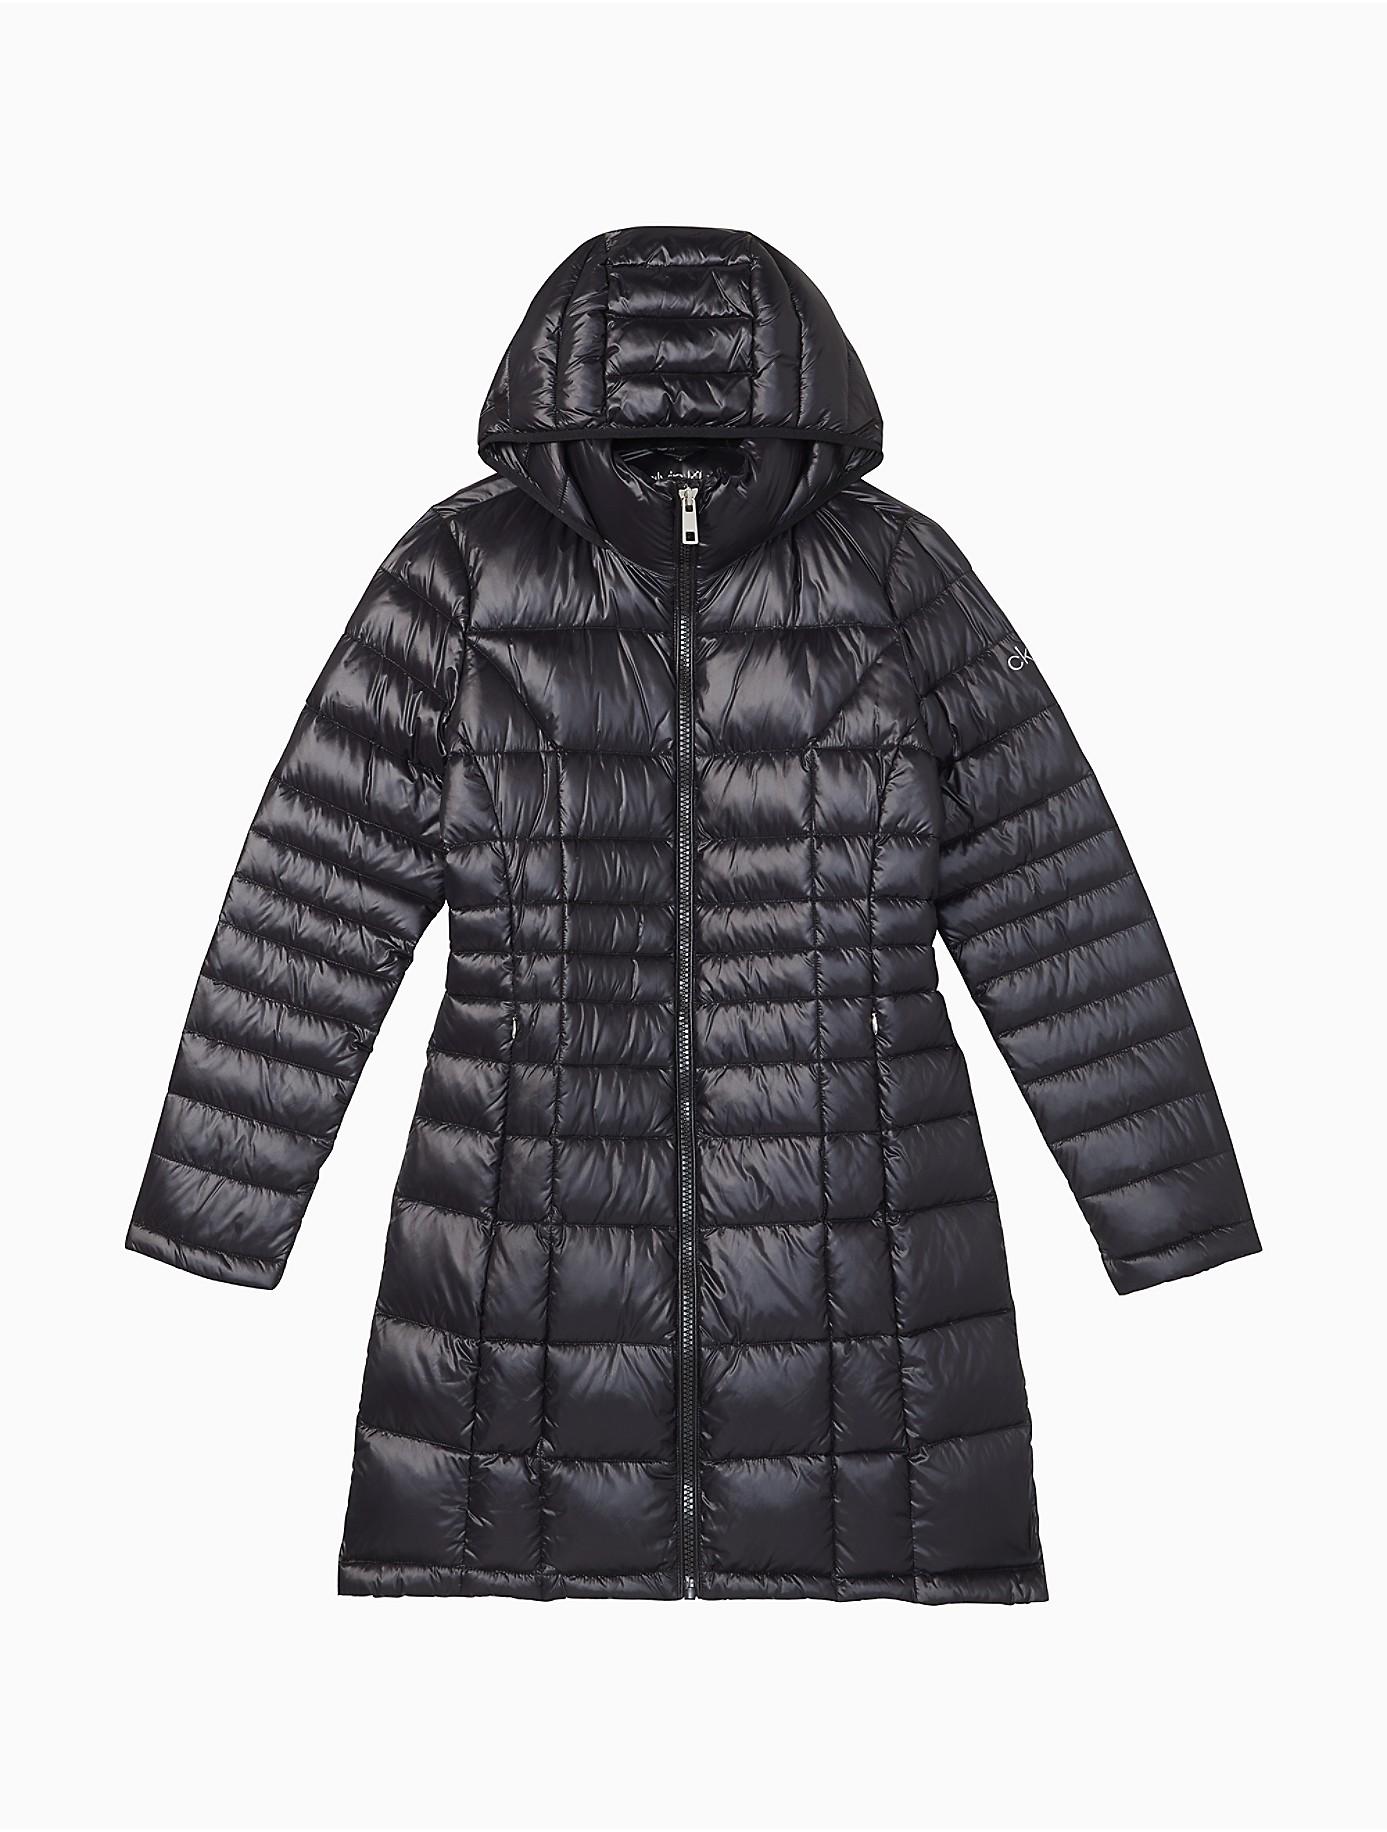 Calvin Klein Synthetic Packable Down Hooded Long Puffer Coat in Black - Lyst